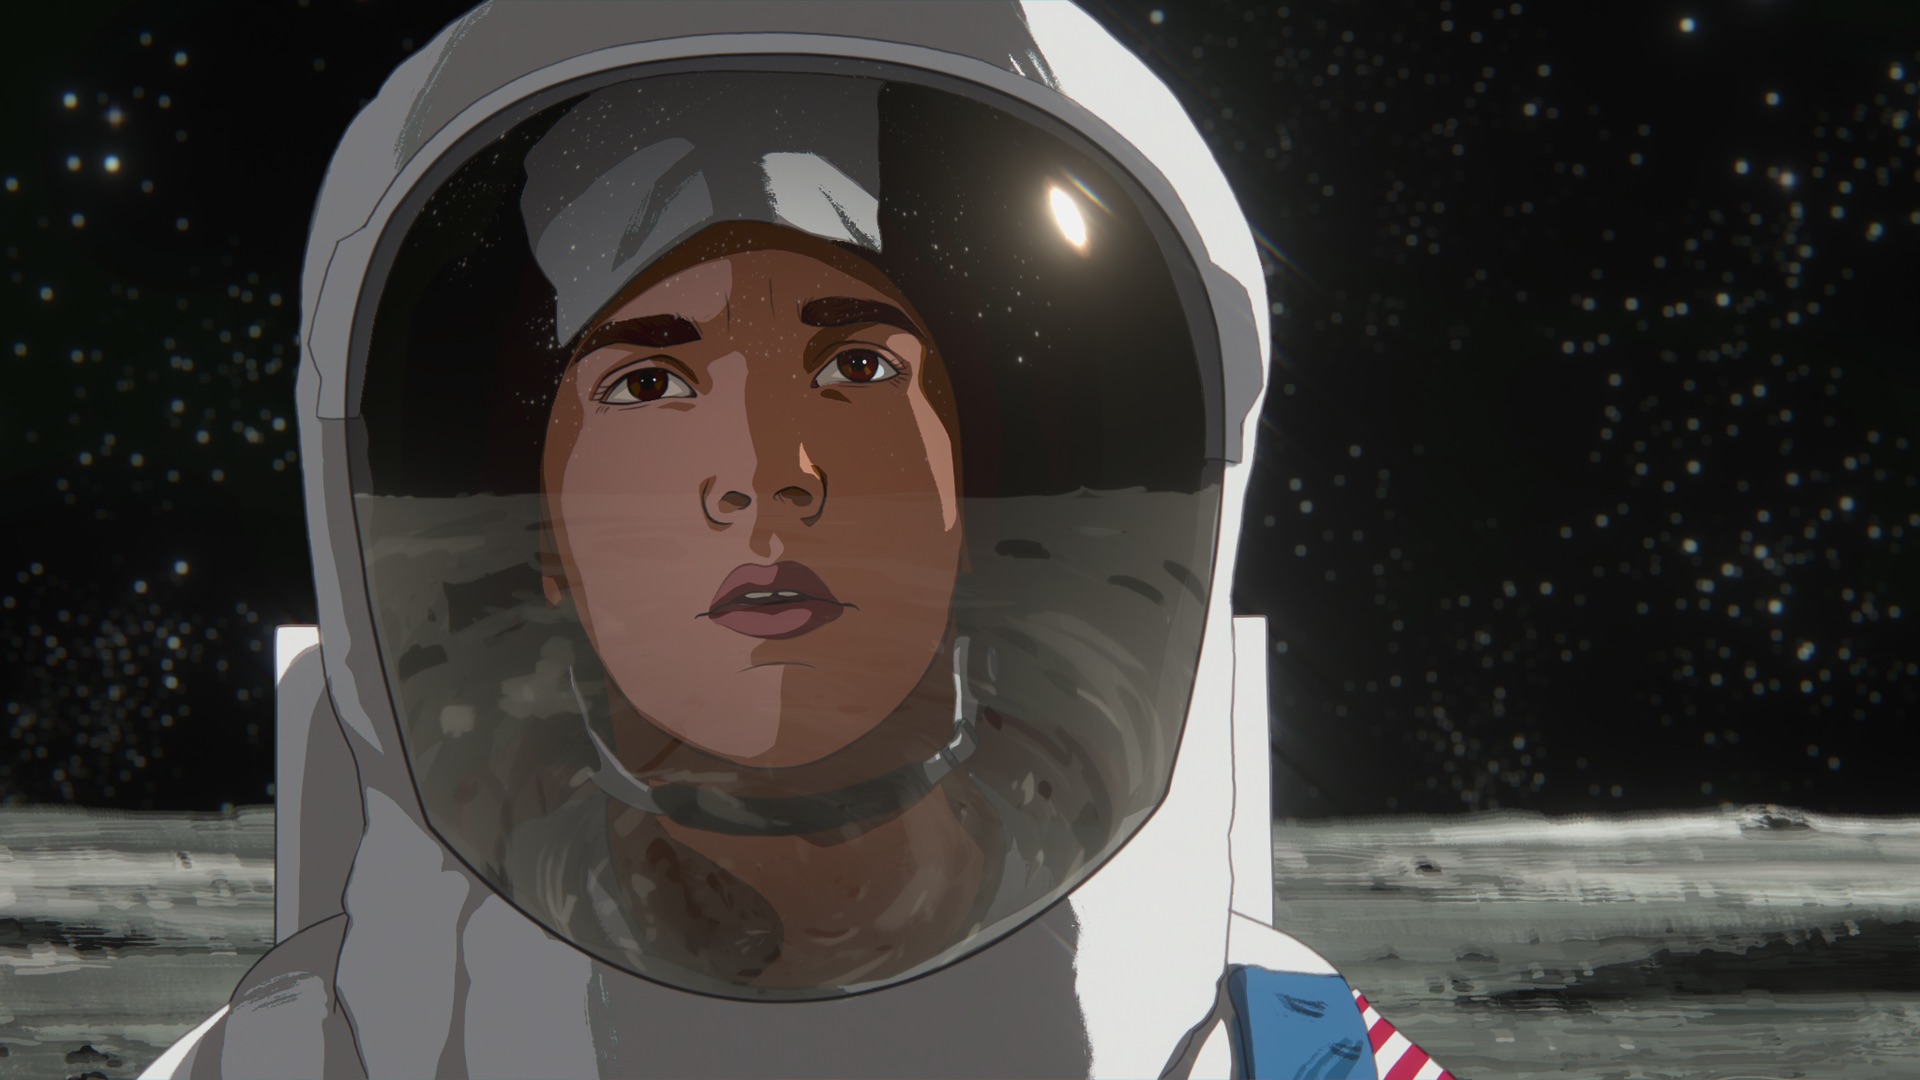 An animated astronaut stands on the moon in Richard Linklater’s Apollo 10 1/2